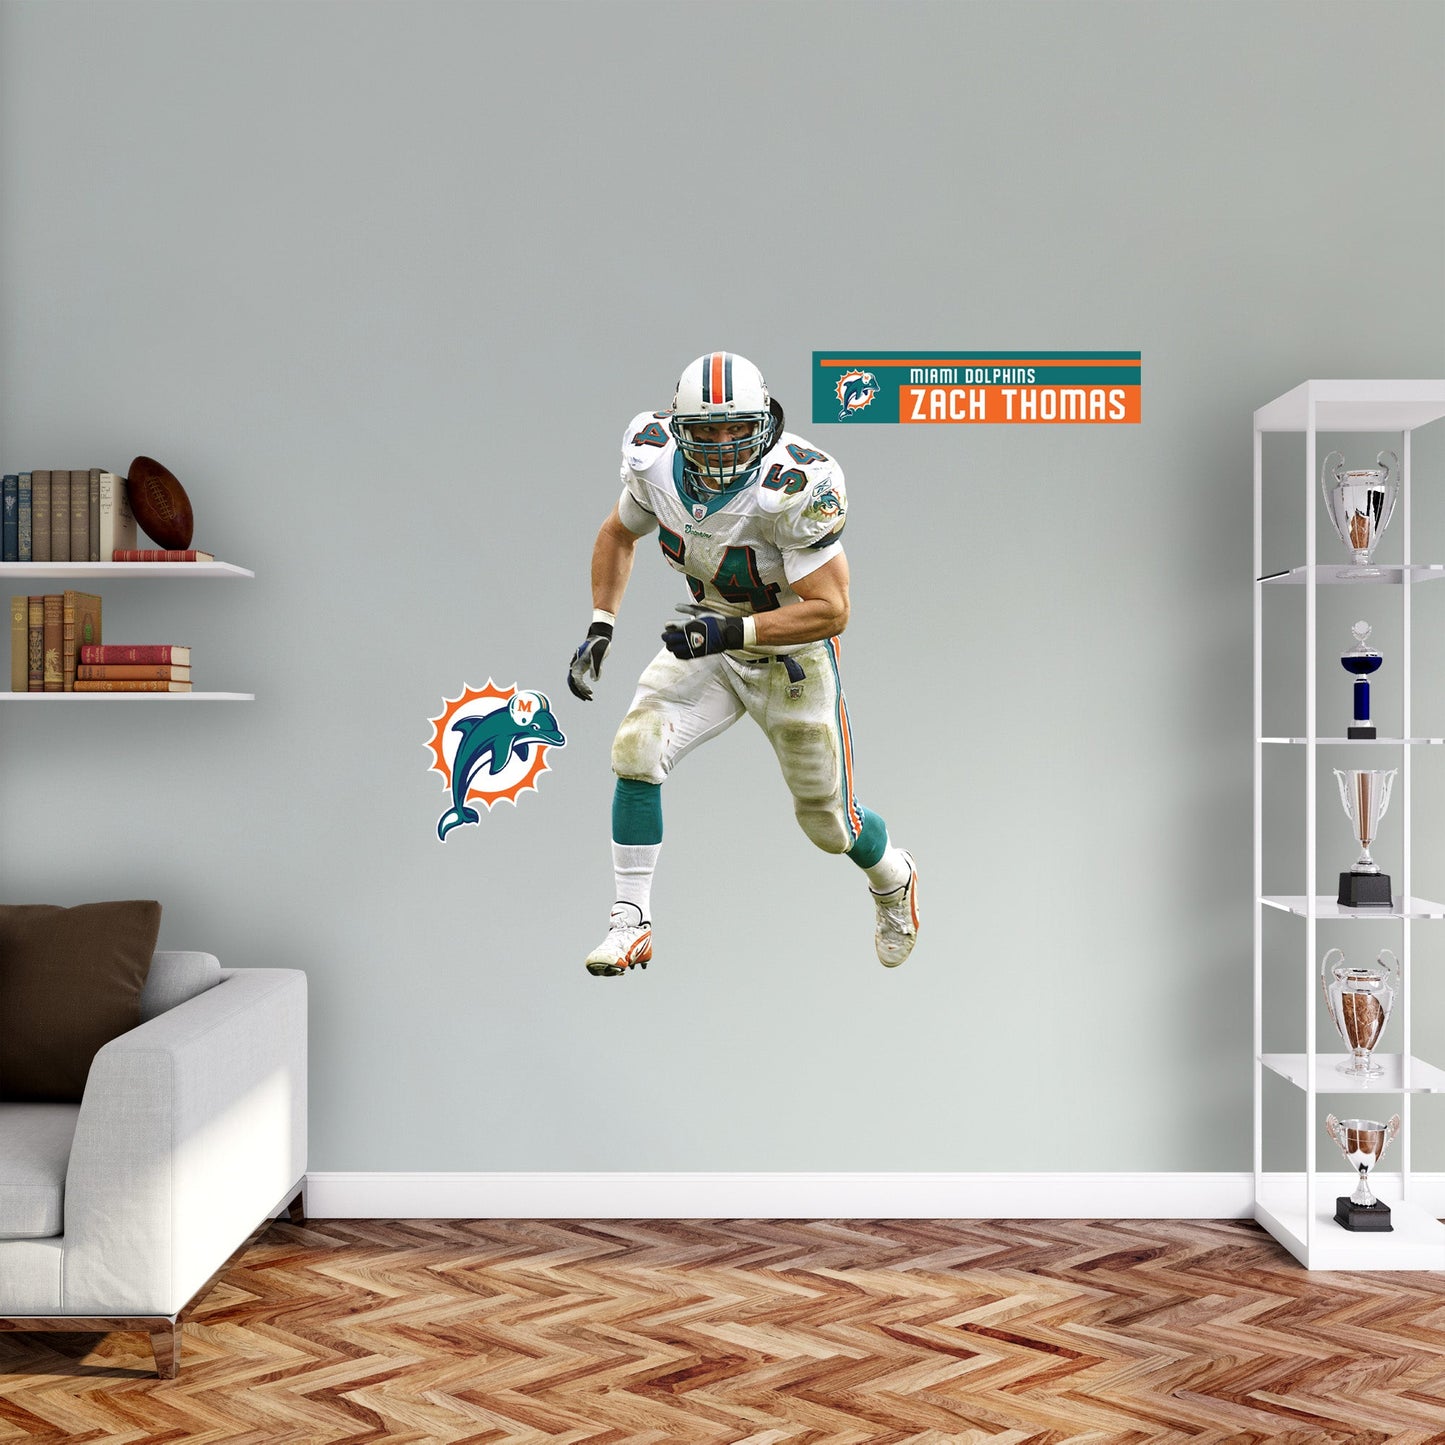 Miami Dolphins: Zach Thomas  Legend        - Officially Licensed NFL Removable     Adhesive Decal